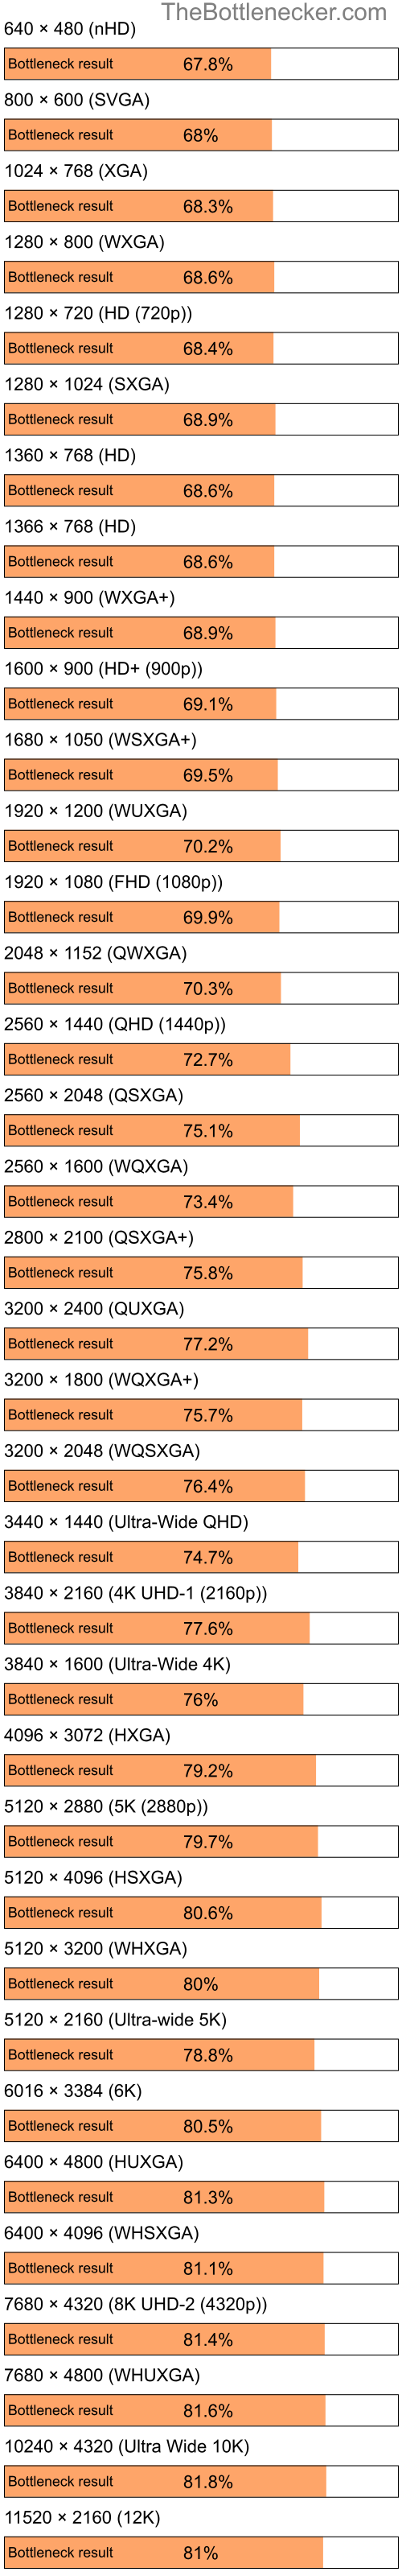 Bottleneck results by resolution for Intel Pentium 4 and AMD Radeon 9800 PRO in General Tasks